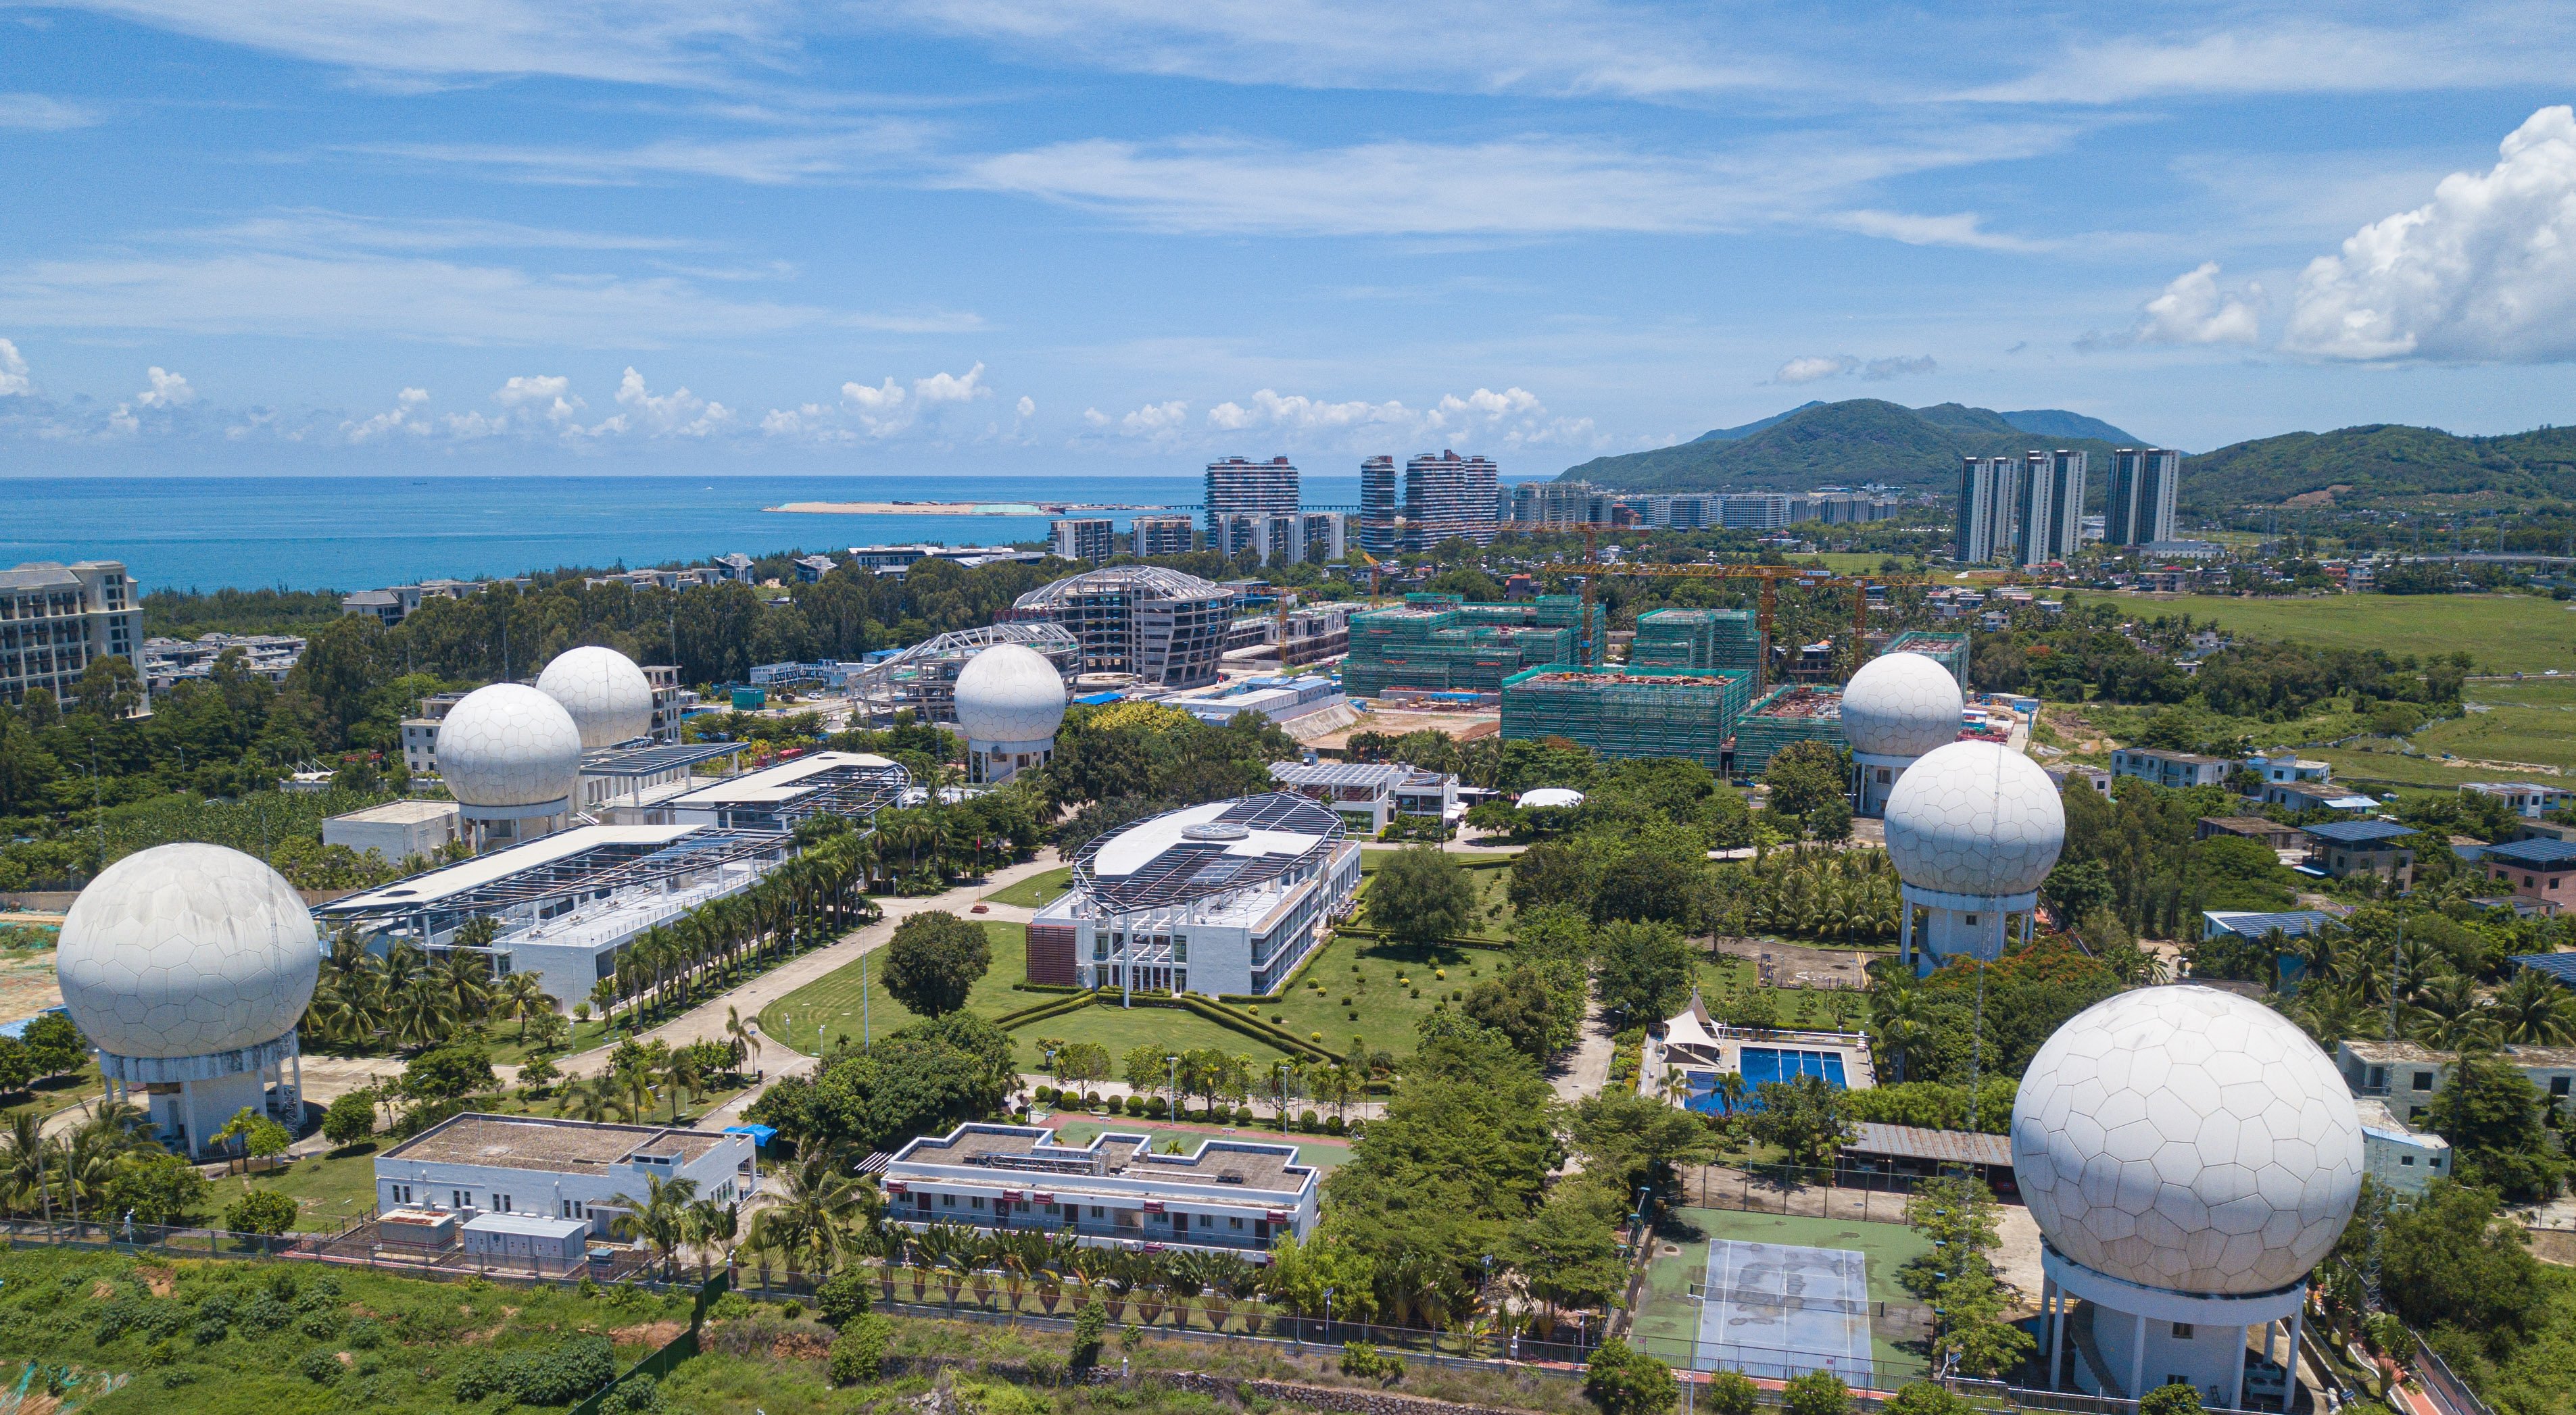 A remote sensing satellite ground station is seen in Hainan province. Australian intelligence claimed APT40 conducted “malicious cyber operations” for an arm of China’s Ministry of State Security based in Hainan. Photo: Xinhua